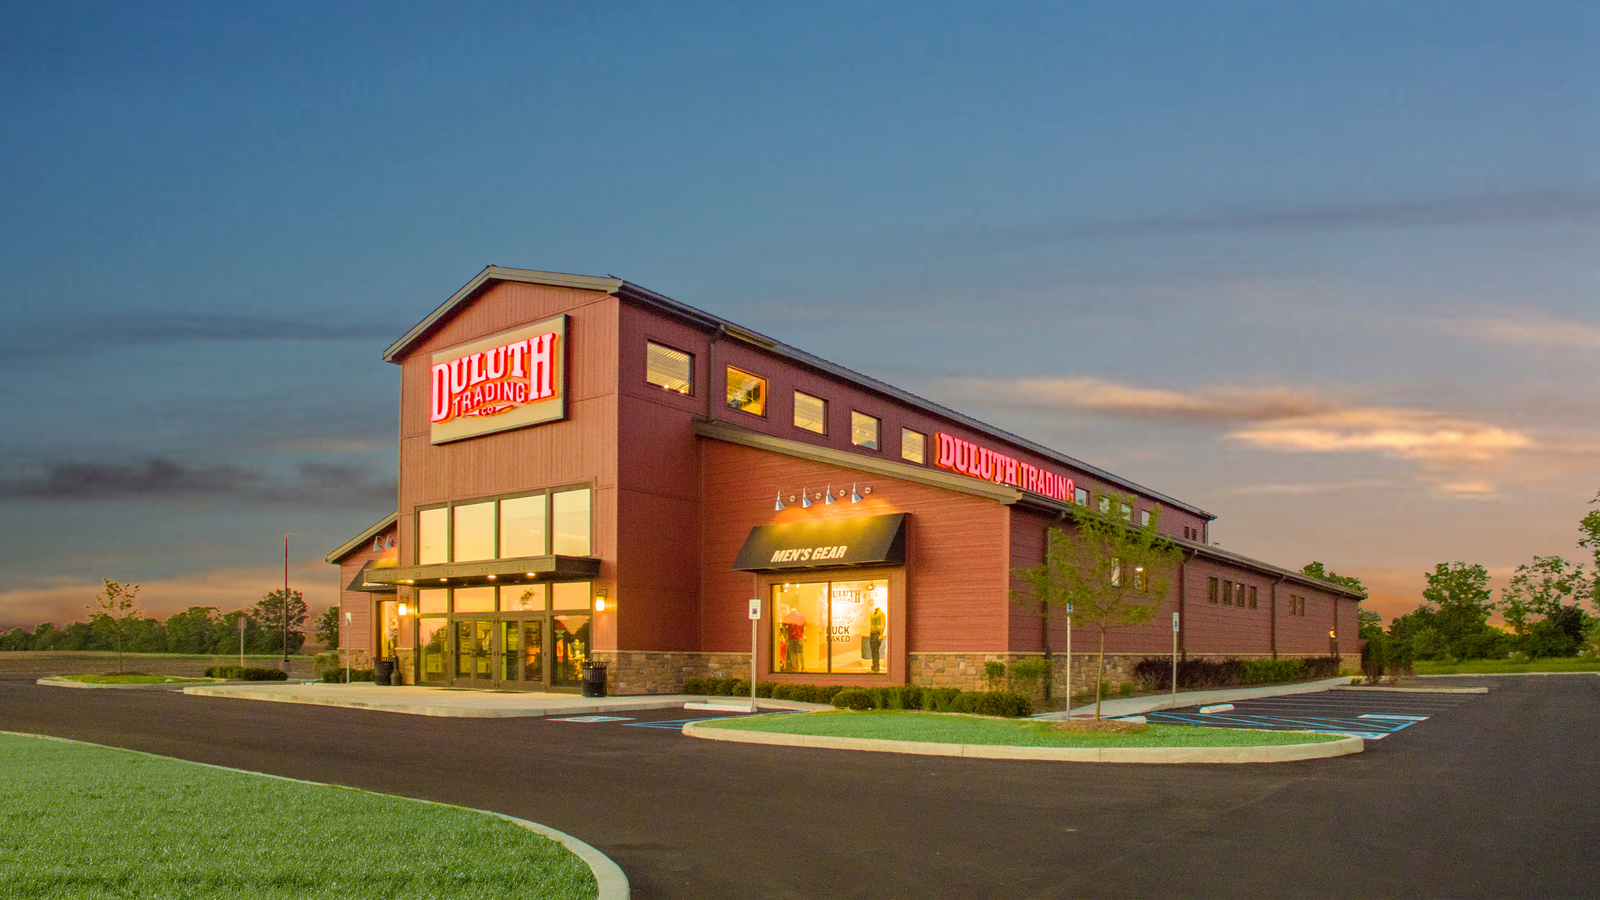 Duluth Trading Company - Noblesville, IN | Oppidan